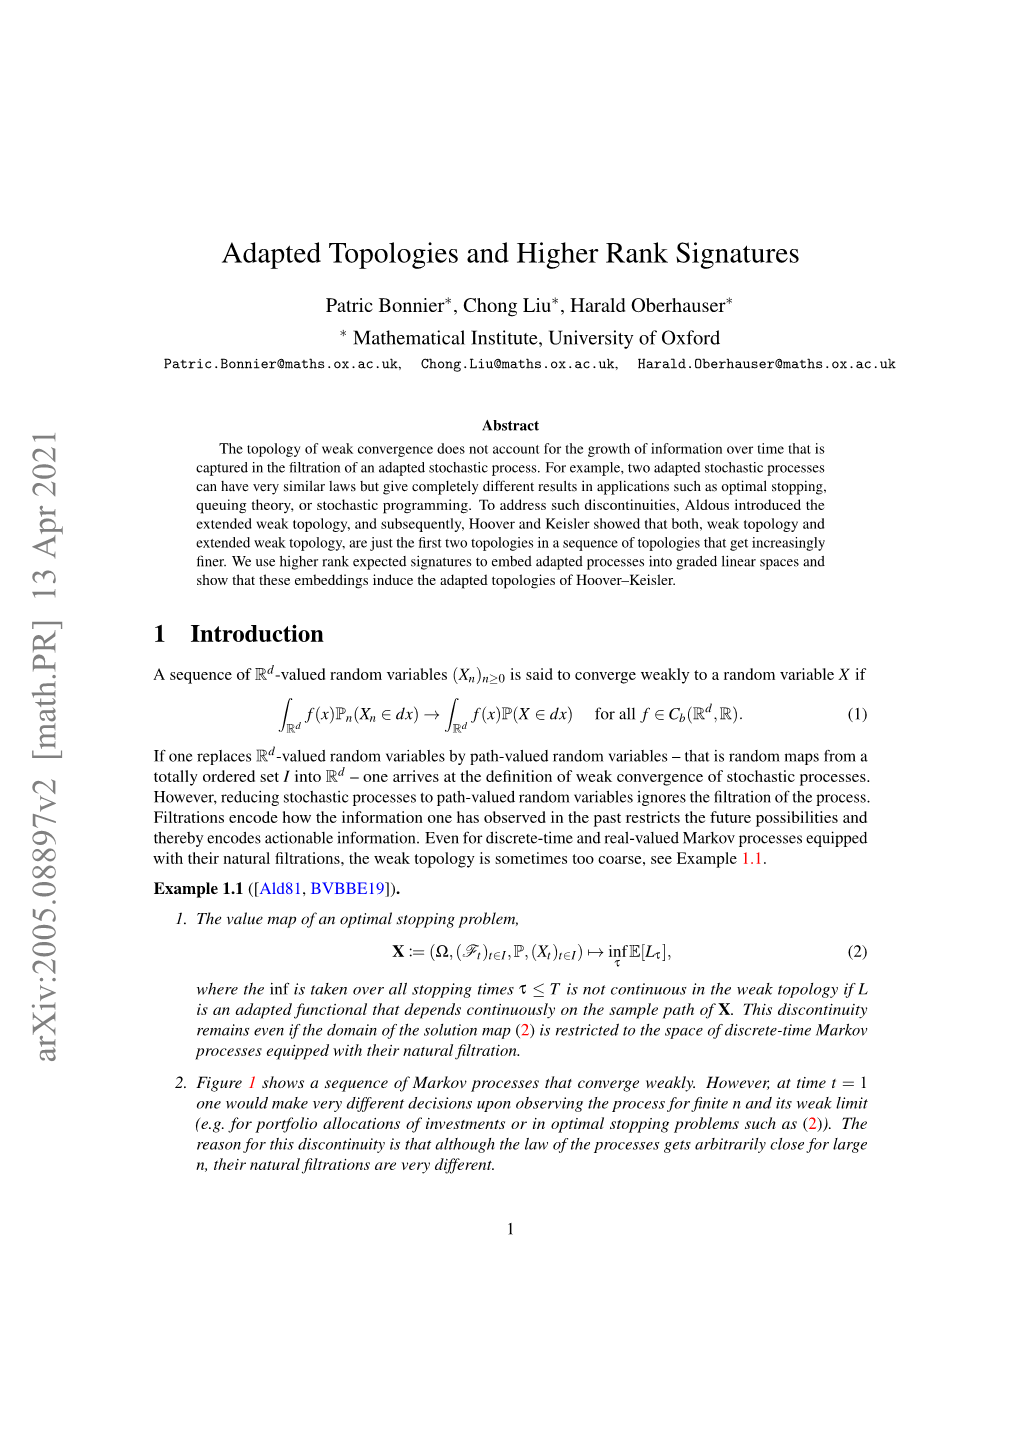 Adapted Topologies and Higher Rank Signatures